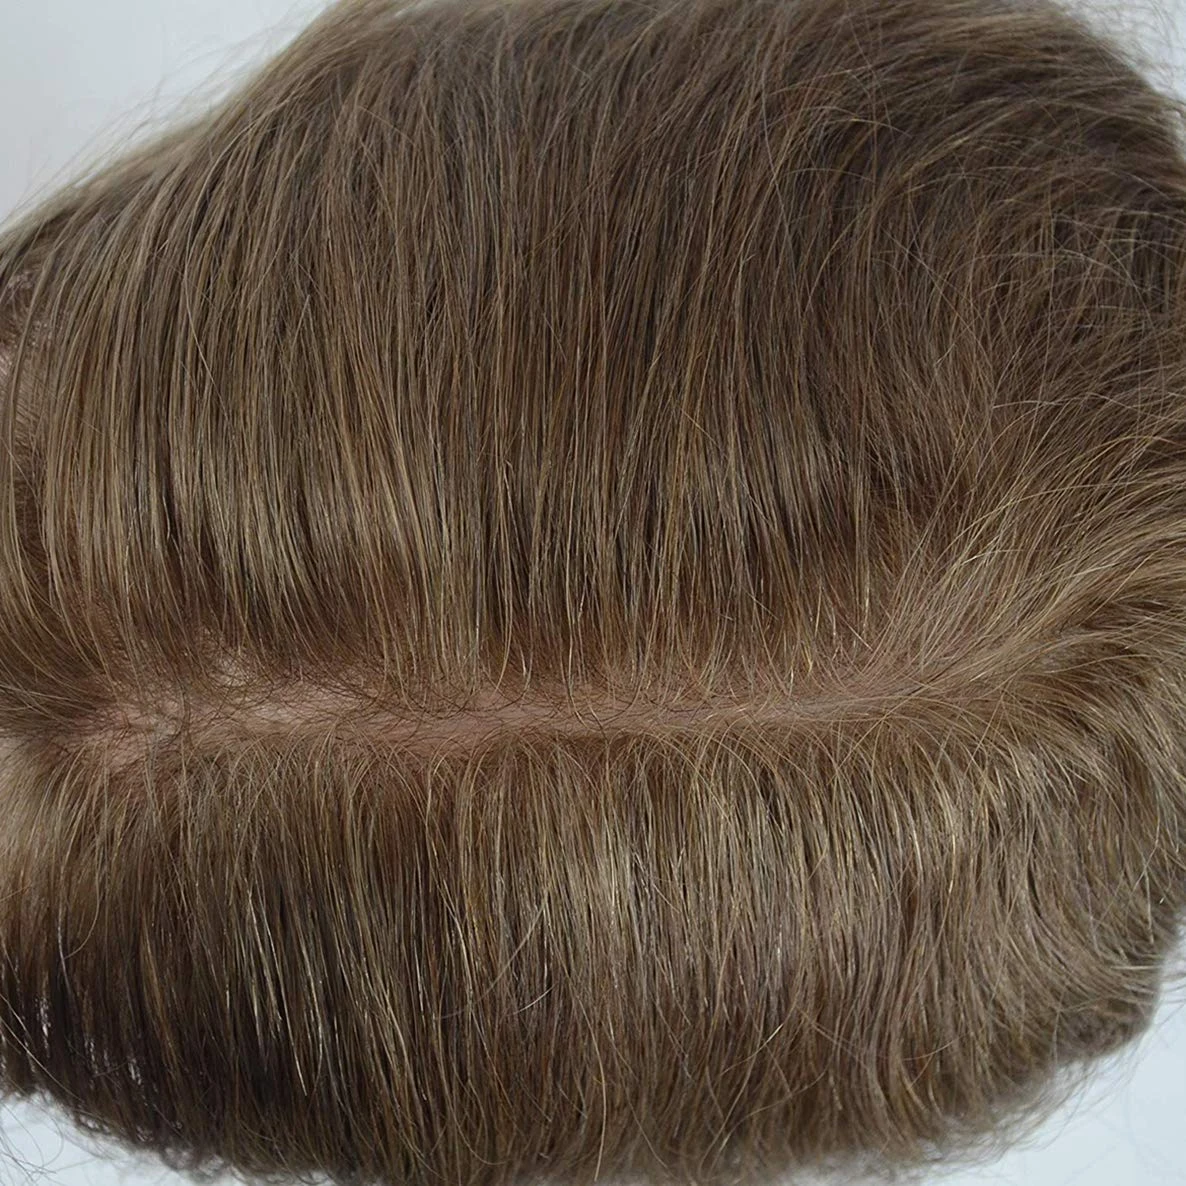 high quality human hair toupee for women,mens toupees with synthetical hair